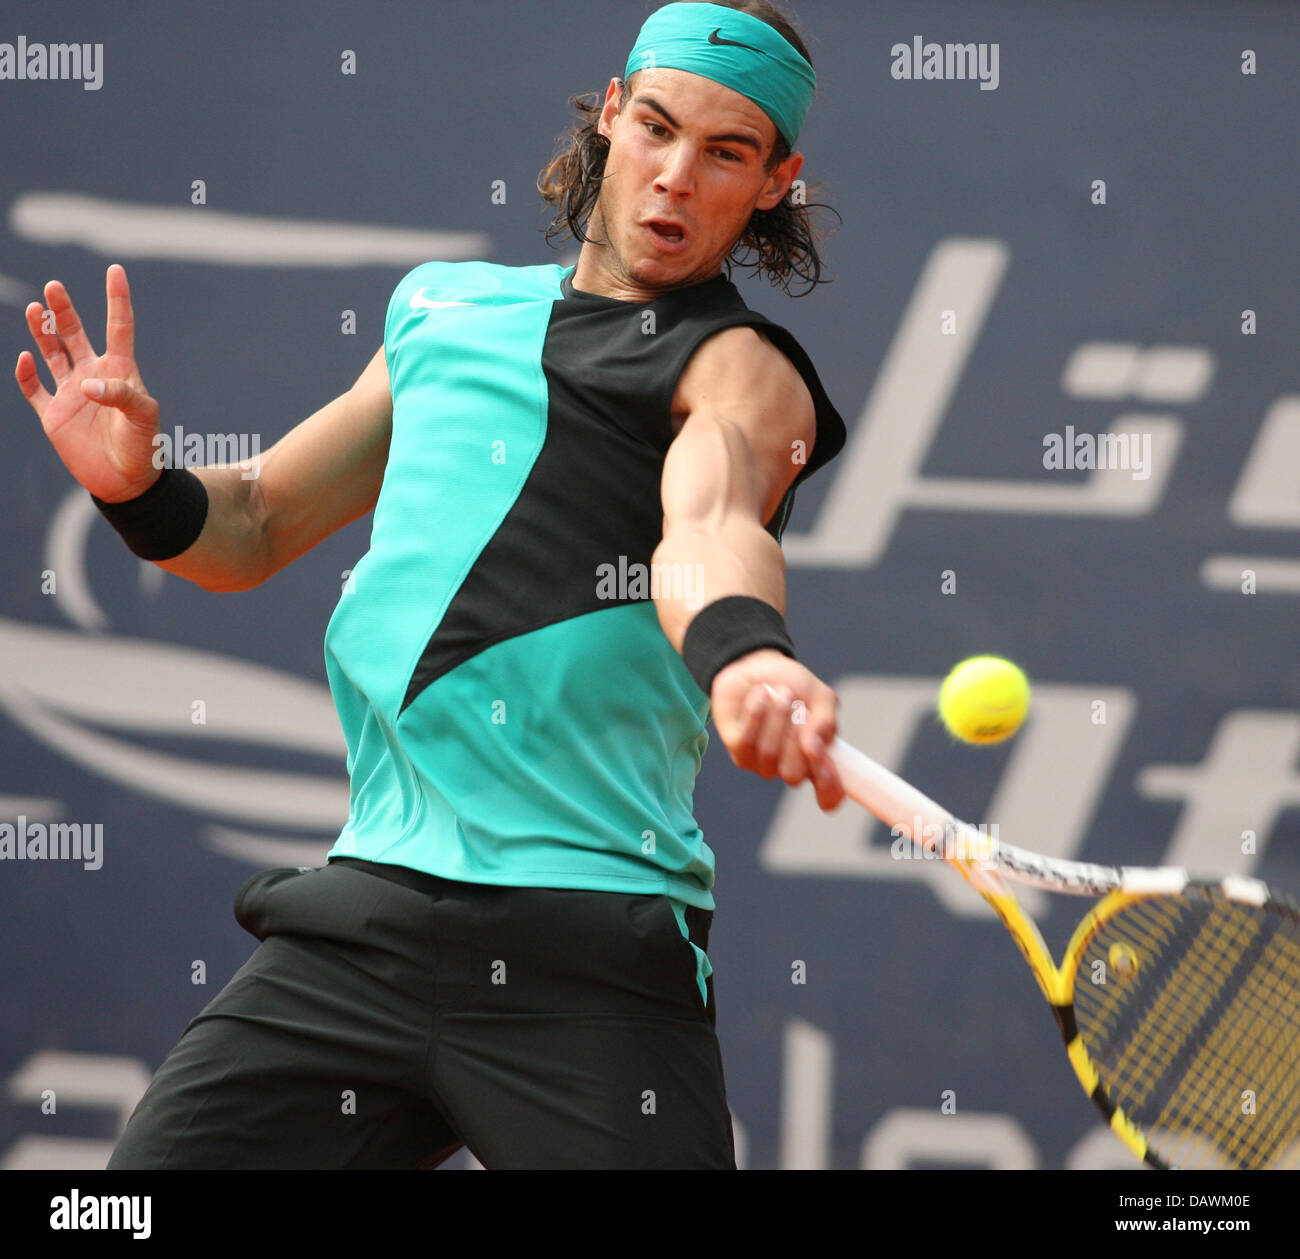 Spanish tennis pro Rafael Nadal hits a forehand during his semi-finals  match against Lleyton Hewitt at the ATP Tennis Masters Rothernbaum in  Hamburg, Germany, 19 May 2007. Nadale defeats Hewitt 2-6, 6-3,